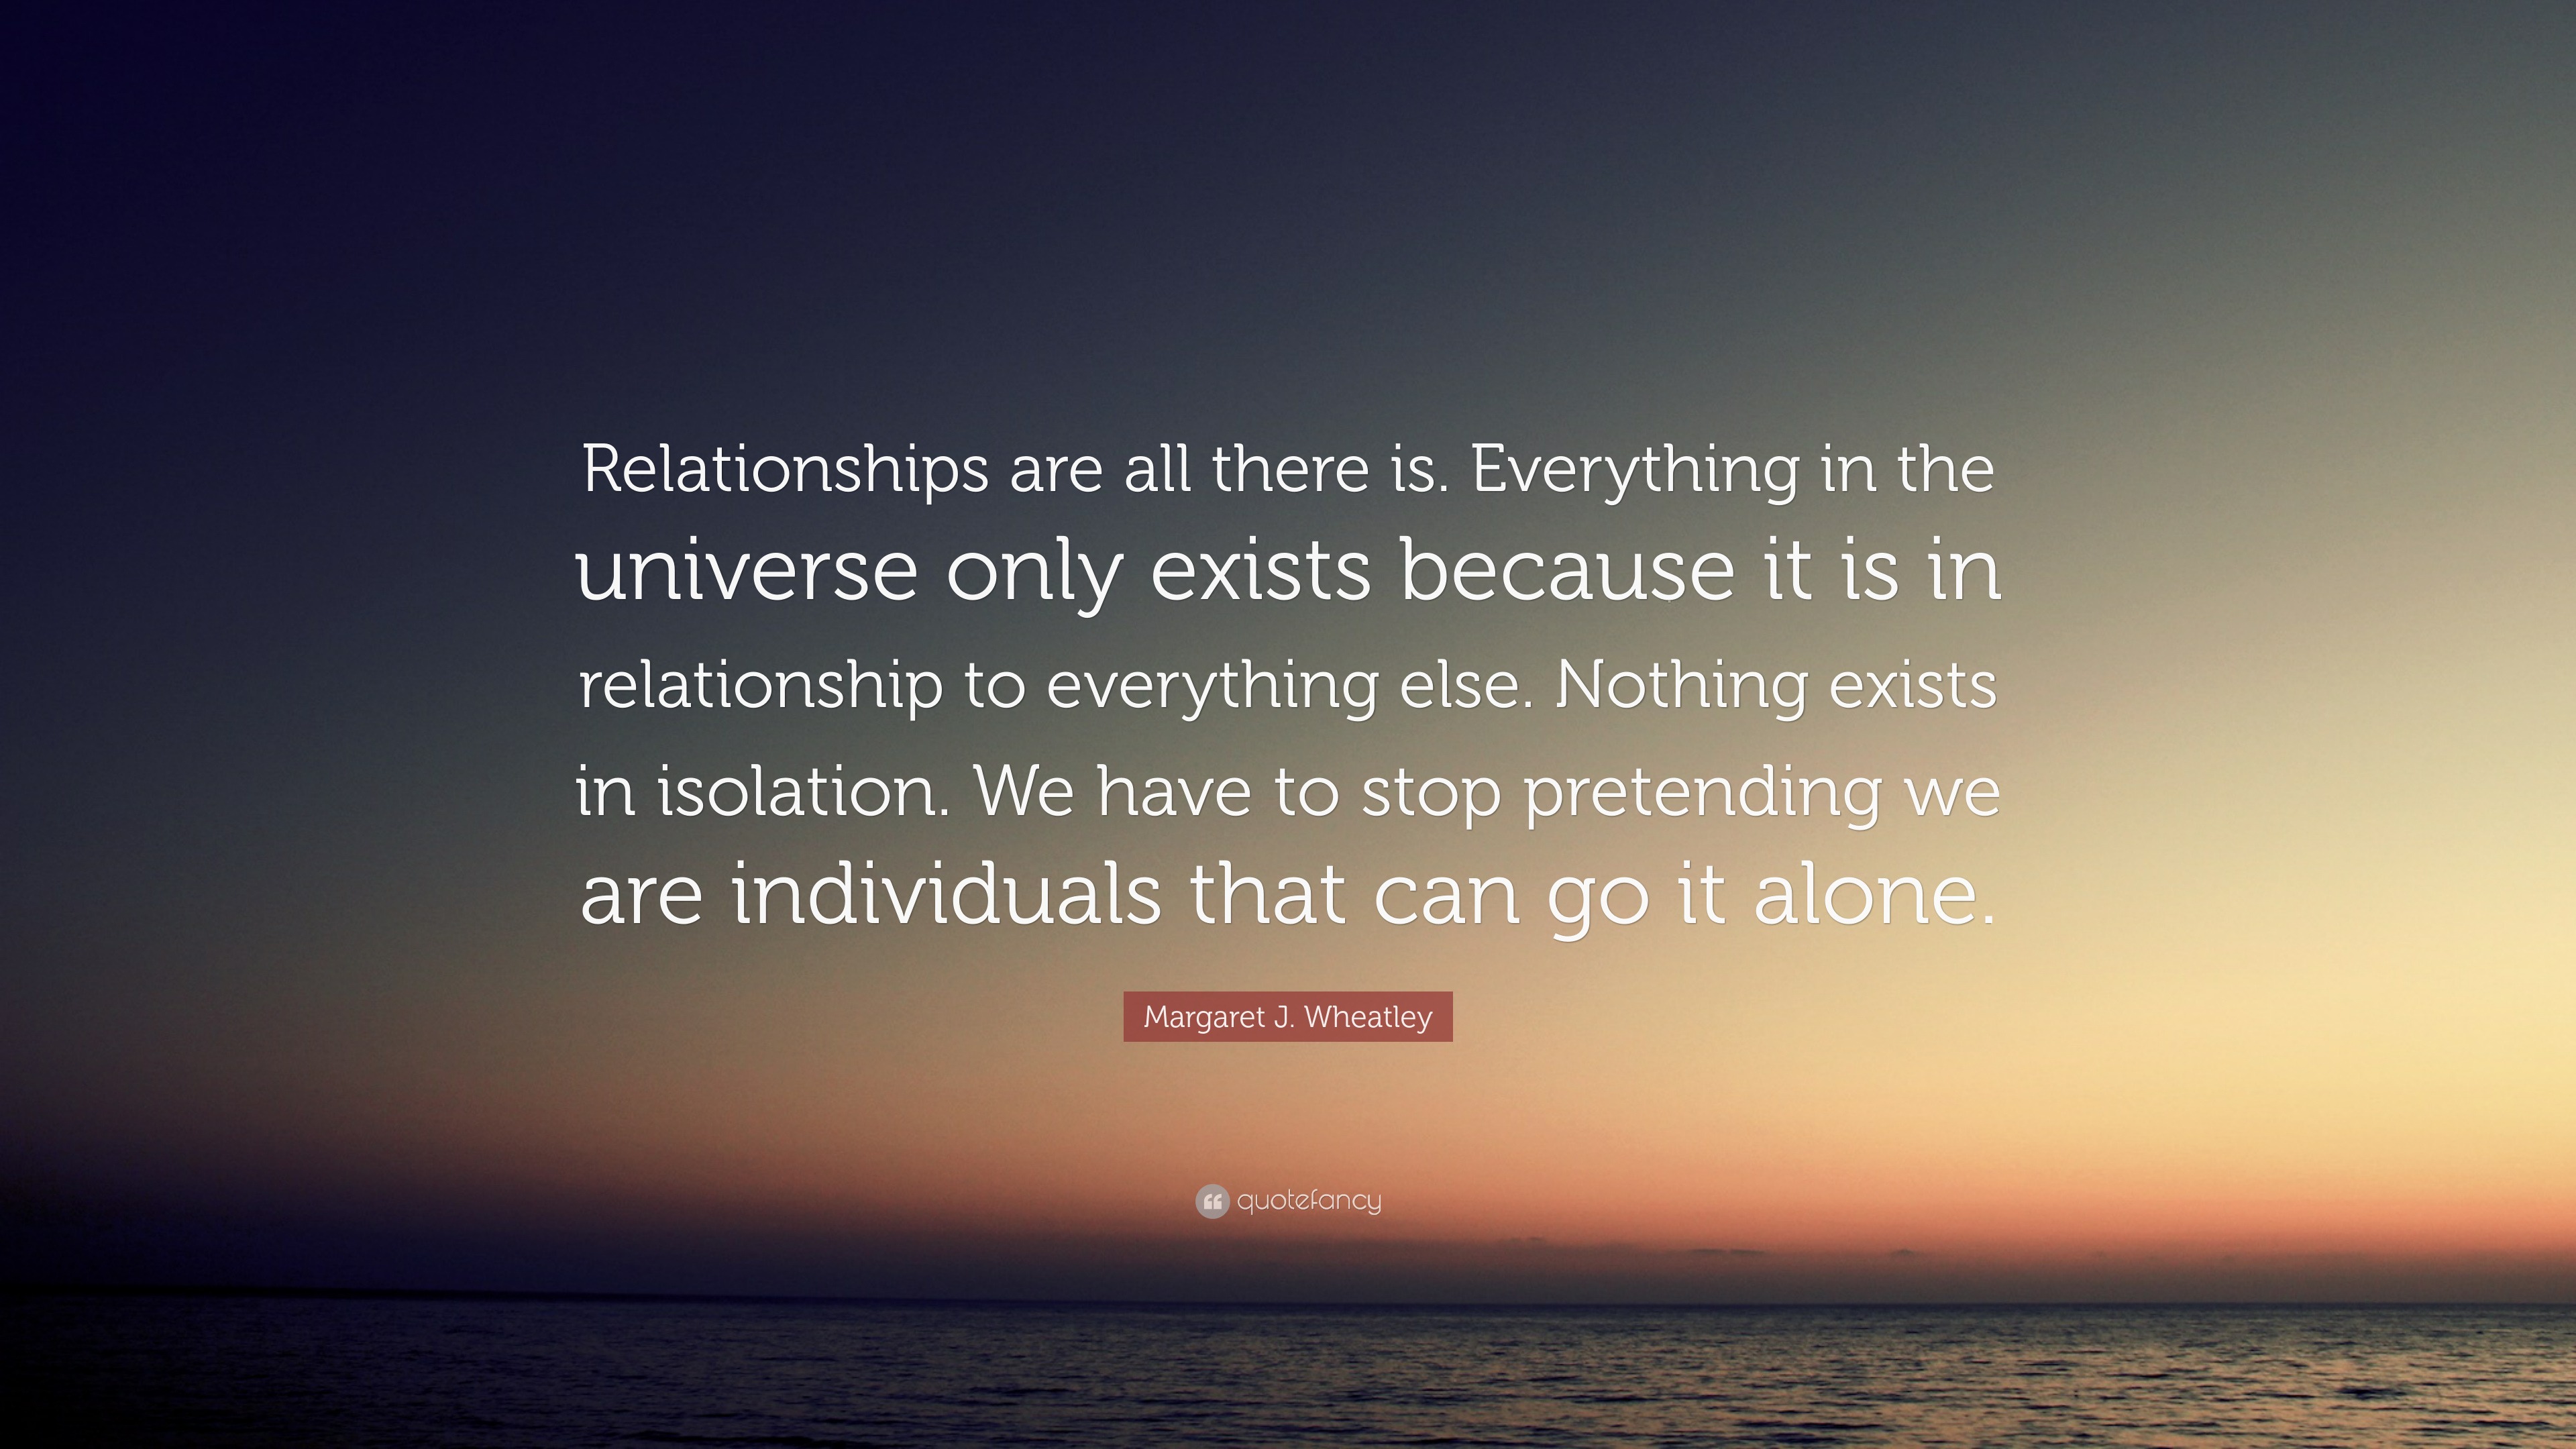 Margaret J. Wheatley Quote: “Relationships are all there is. Everything ...